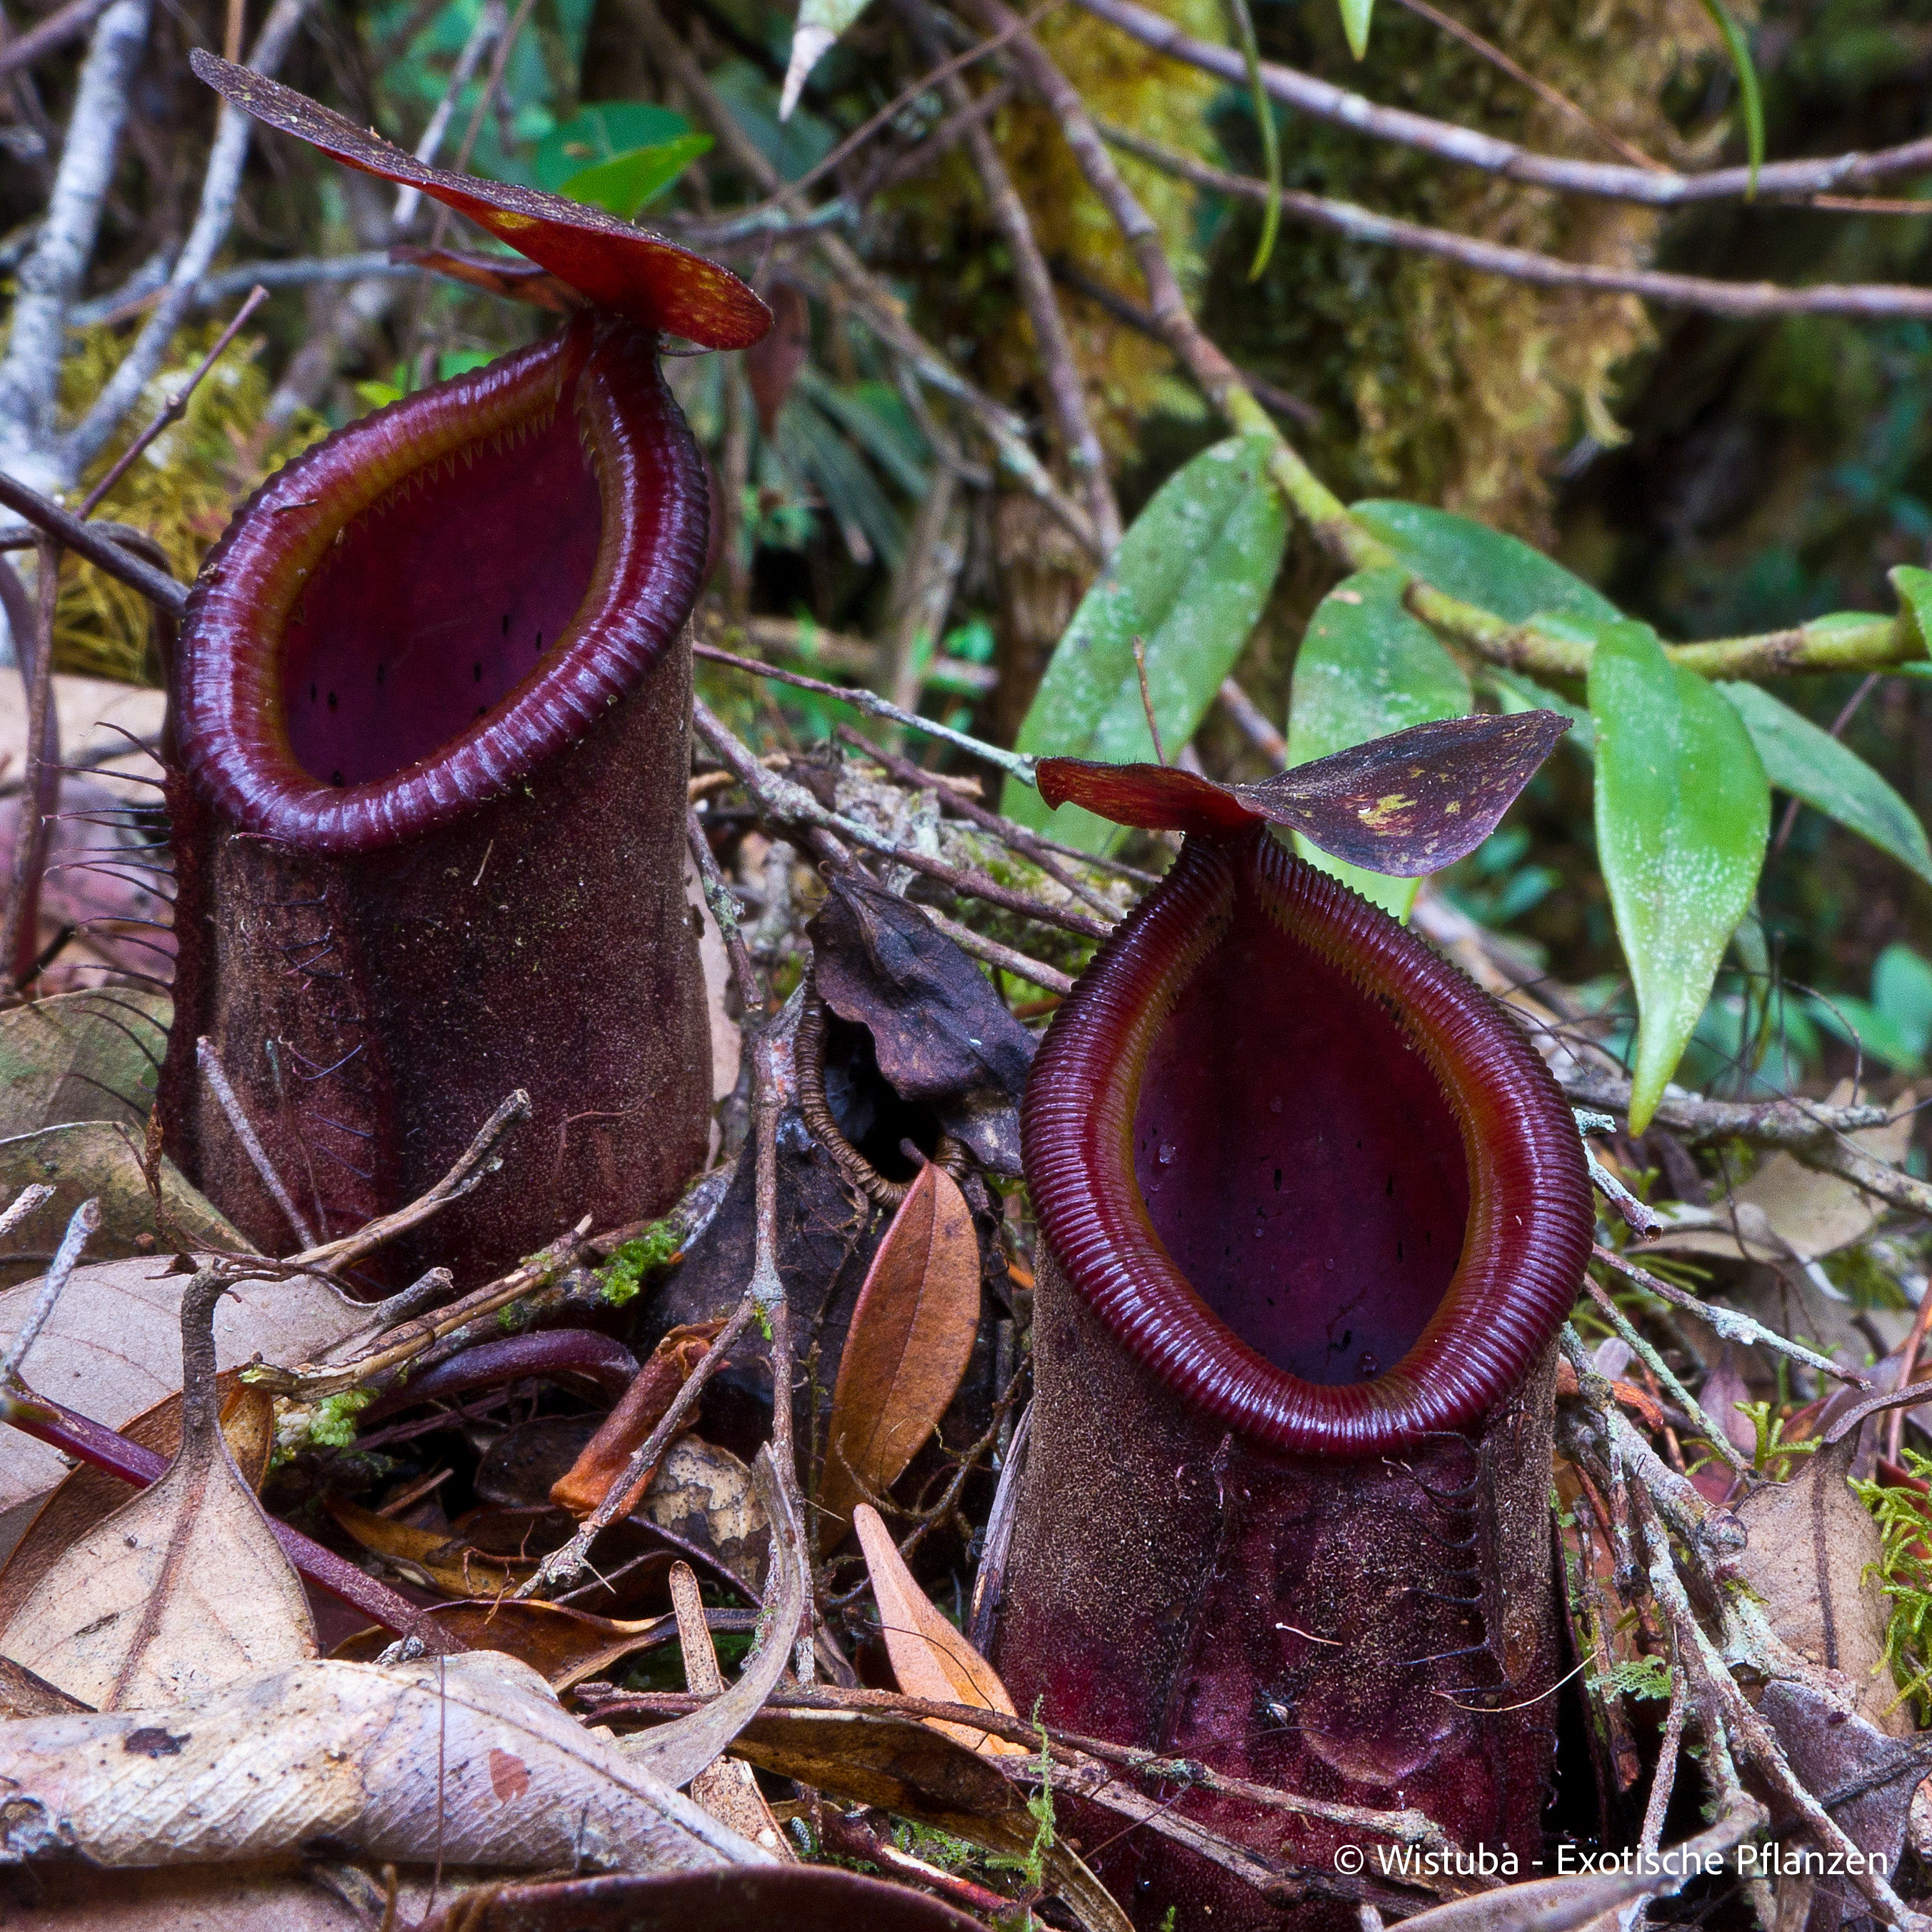 Nepenthes pitopangii ("Ivory Colored Form")